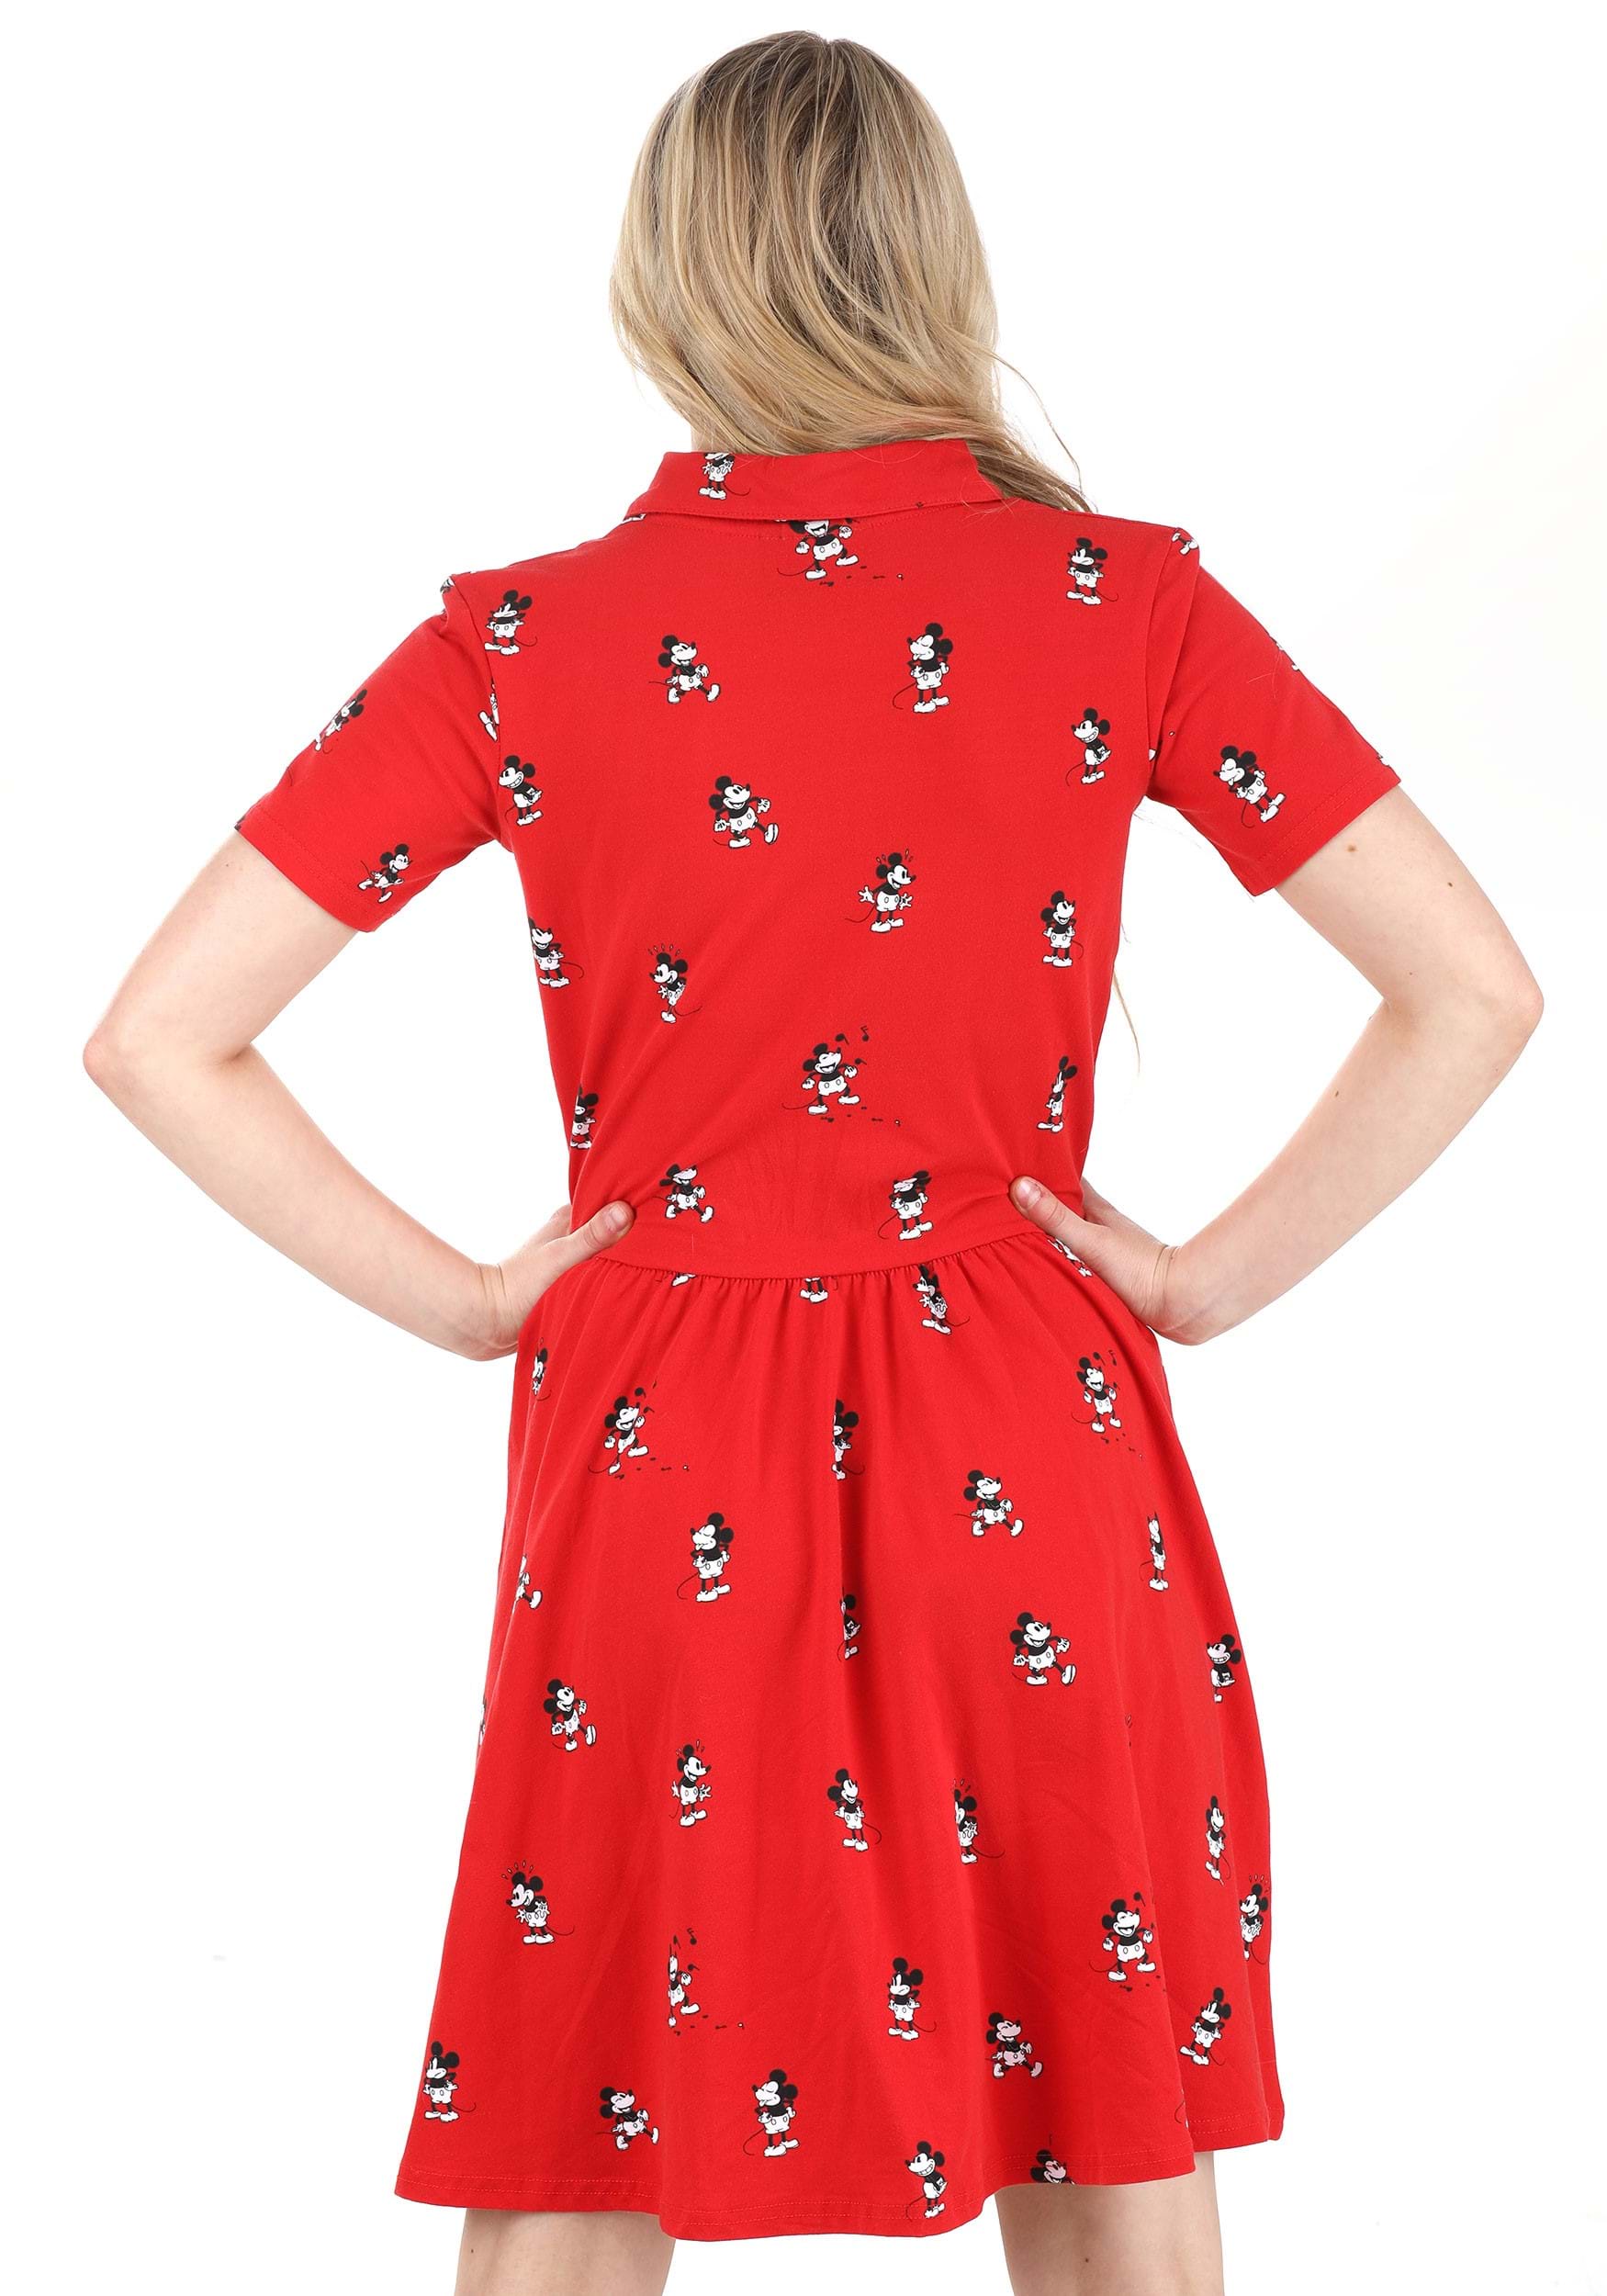 Women's Cakeworthy Vintage Mickey Mouse Button Up Dress